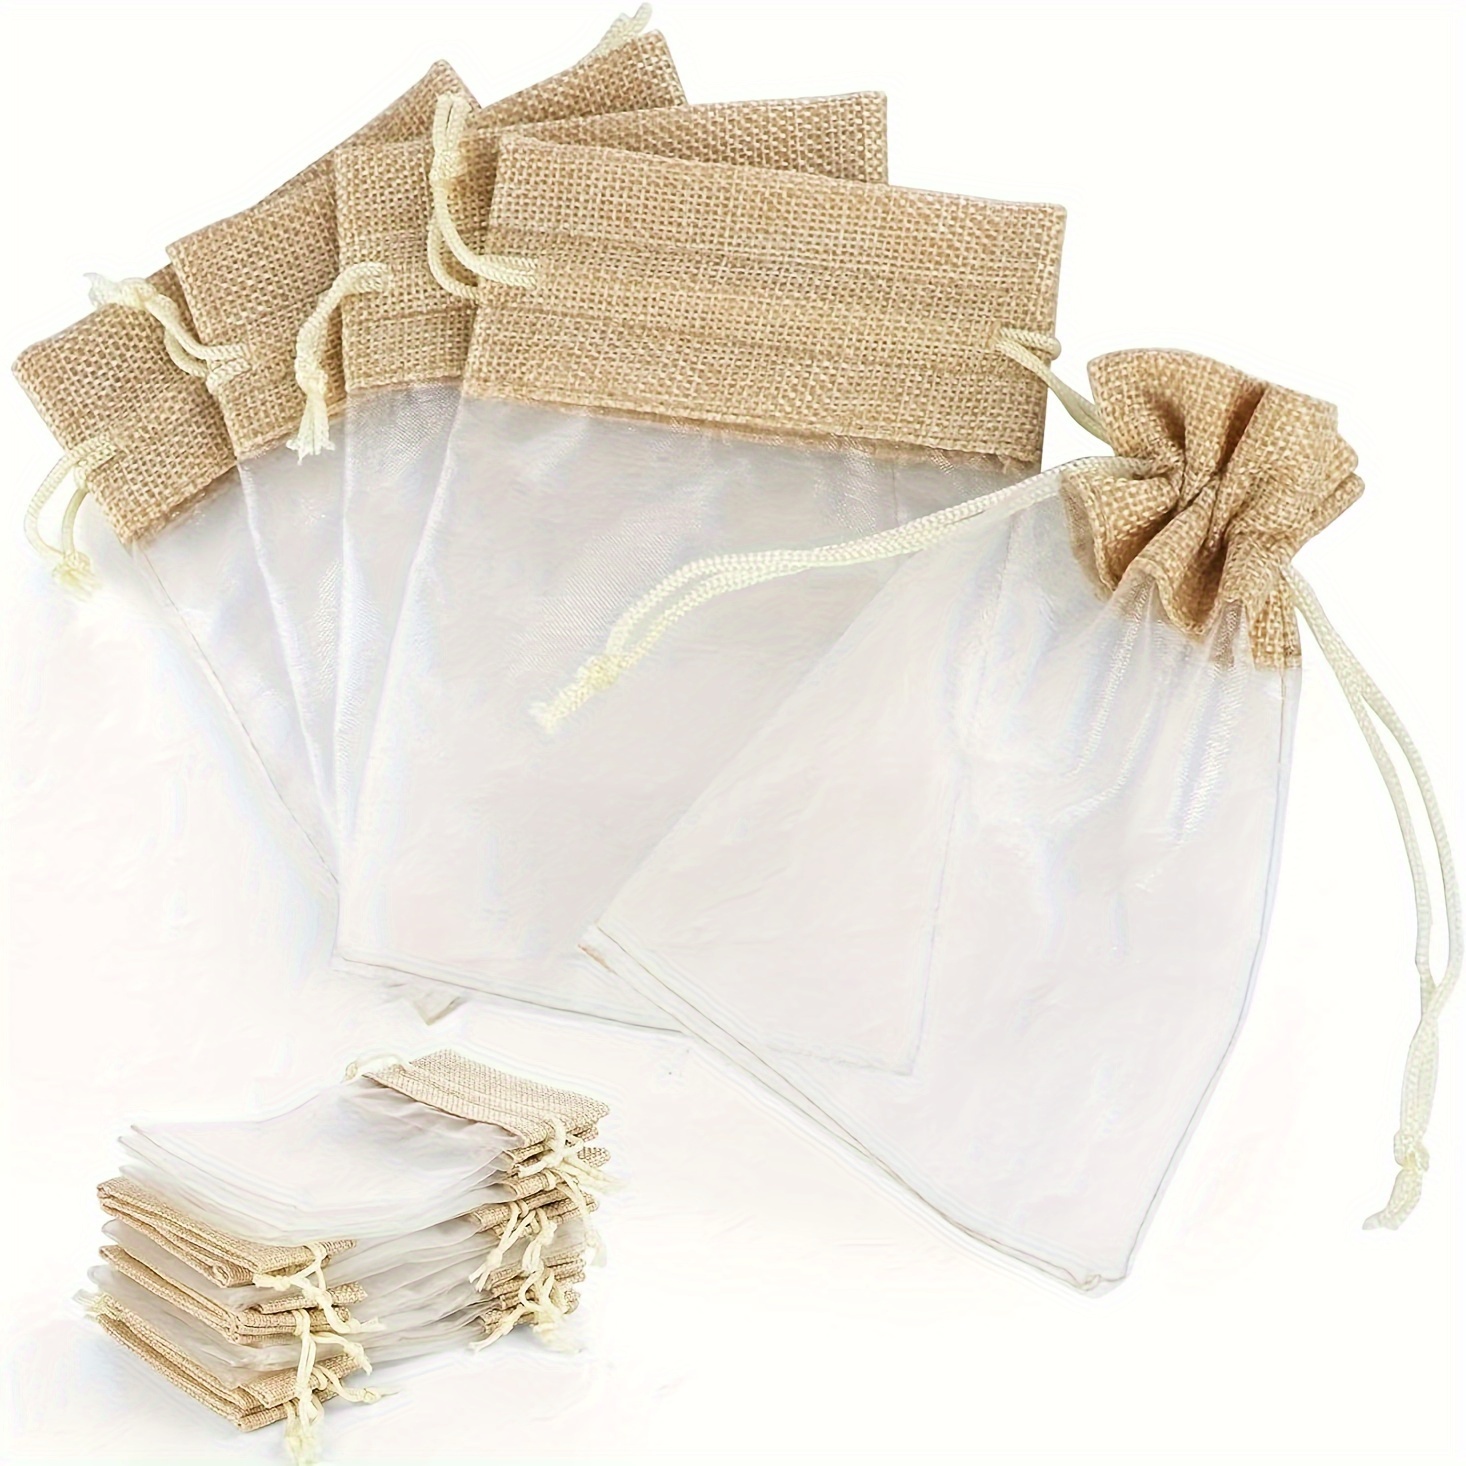 

30pcs Sheer Drawstring Bags, Wedding Favors Bag Jewelry Gift Bag, Candy Bags Pouches For Jewelry Craft Bridal Wedding Party Shower Birthday, Sundries Storage Supplies